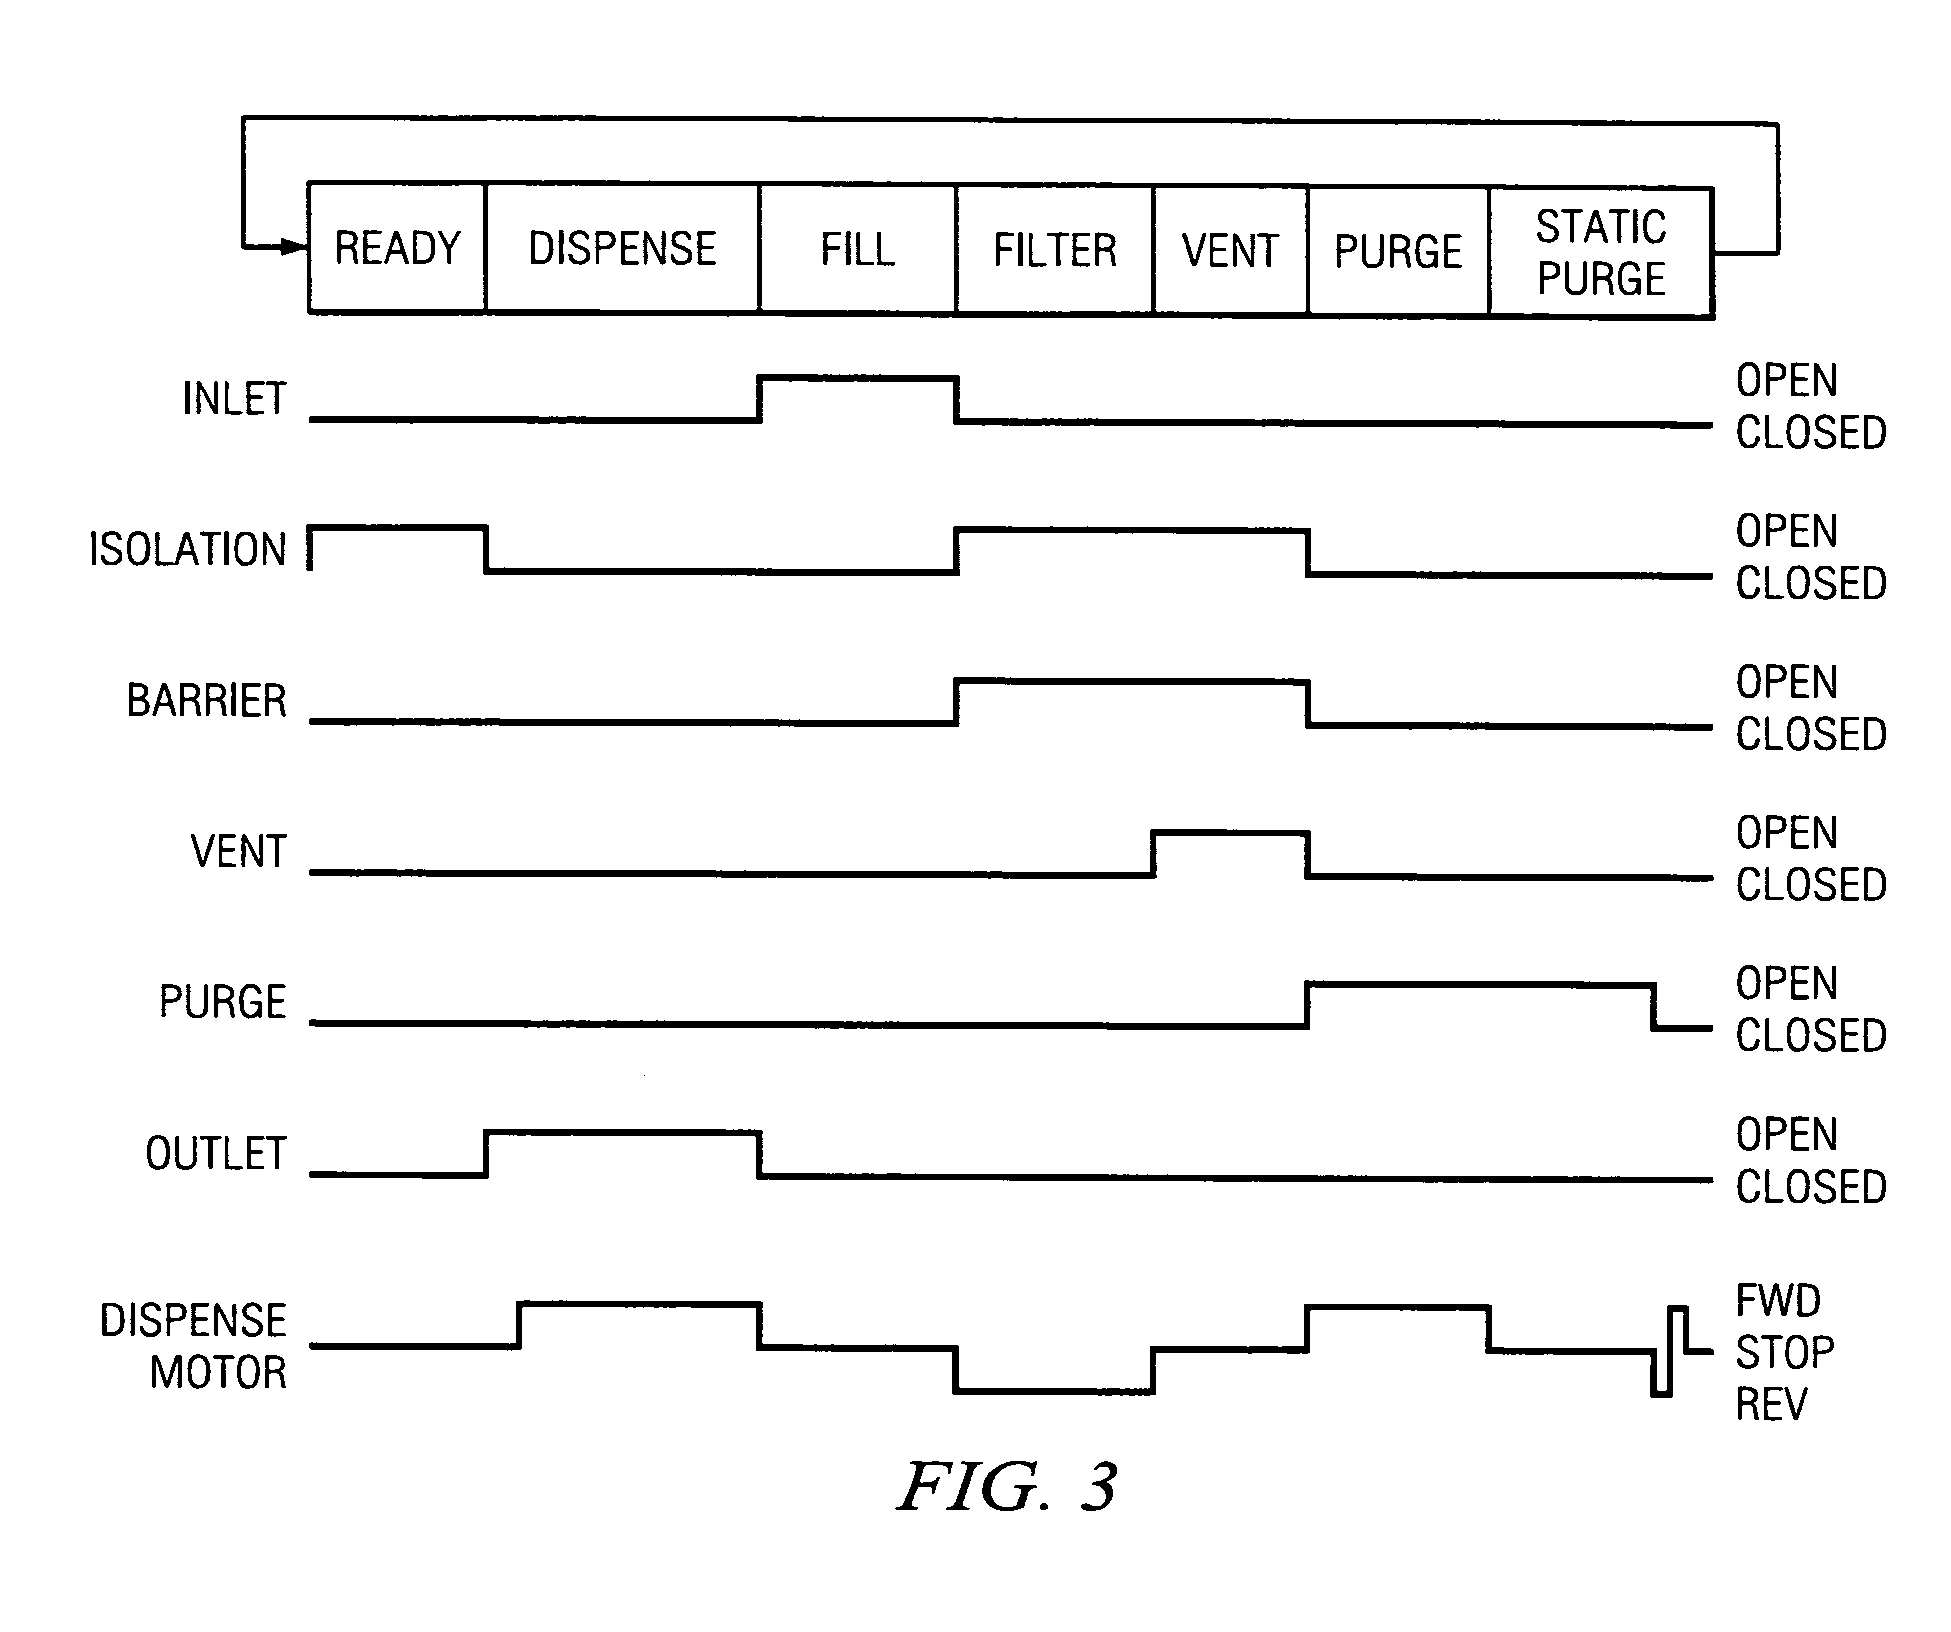 System and method for monitoring operation of a pump